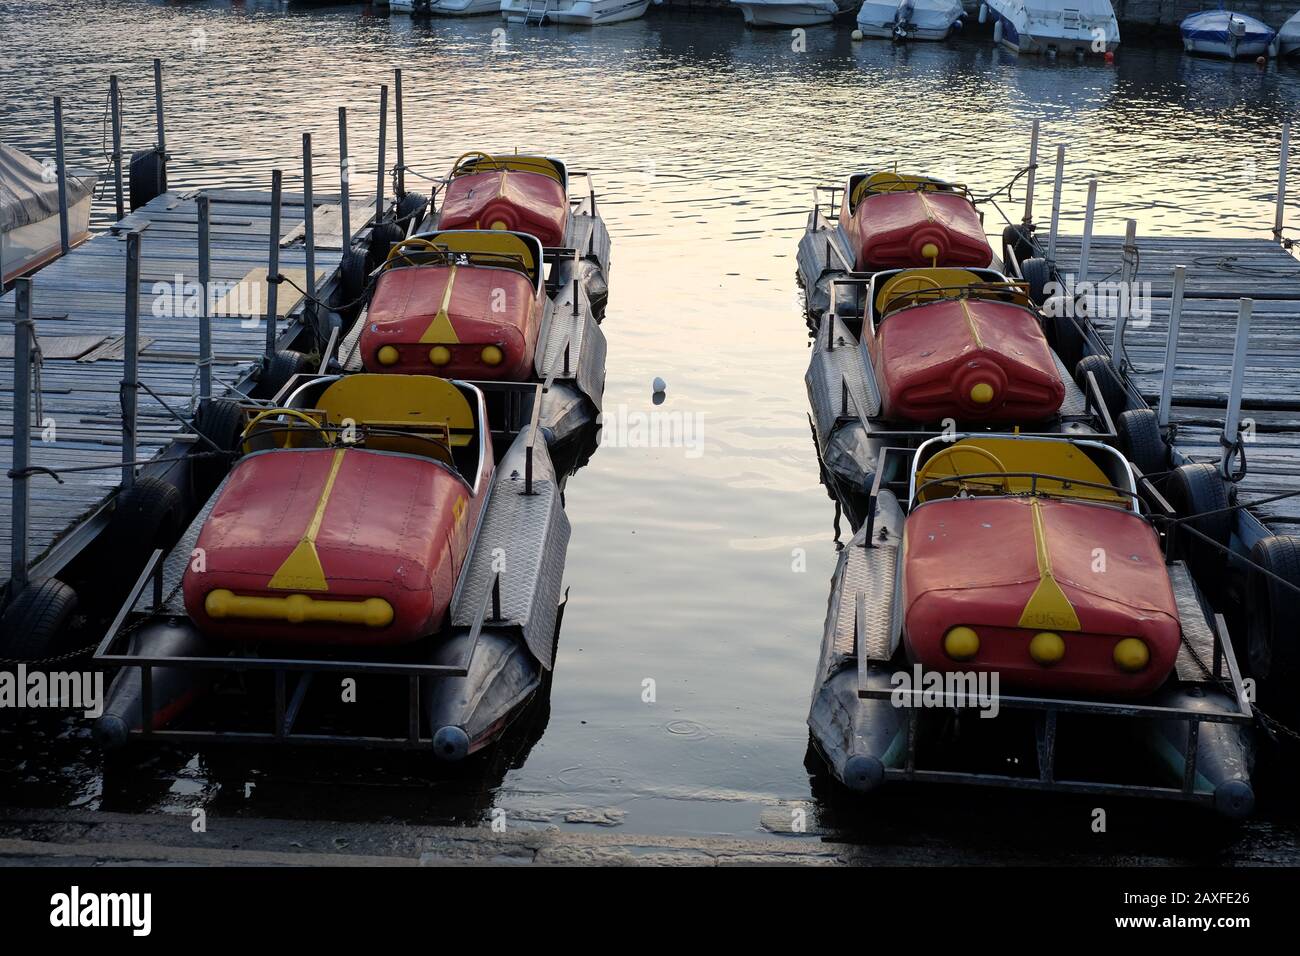 Pedal boats on Lake Como, Lombardy Italy, a beautiful alpine lake of picturesque villages, luxurious villas, palazzo, holiday resorts dramatic scenery Stock Photo